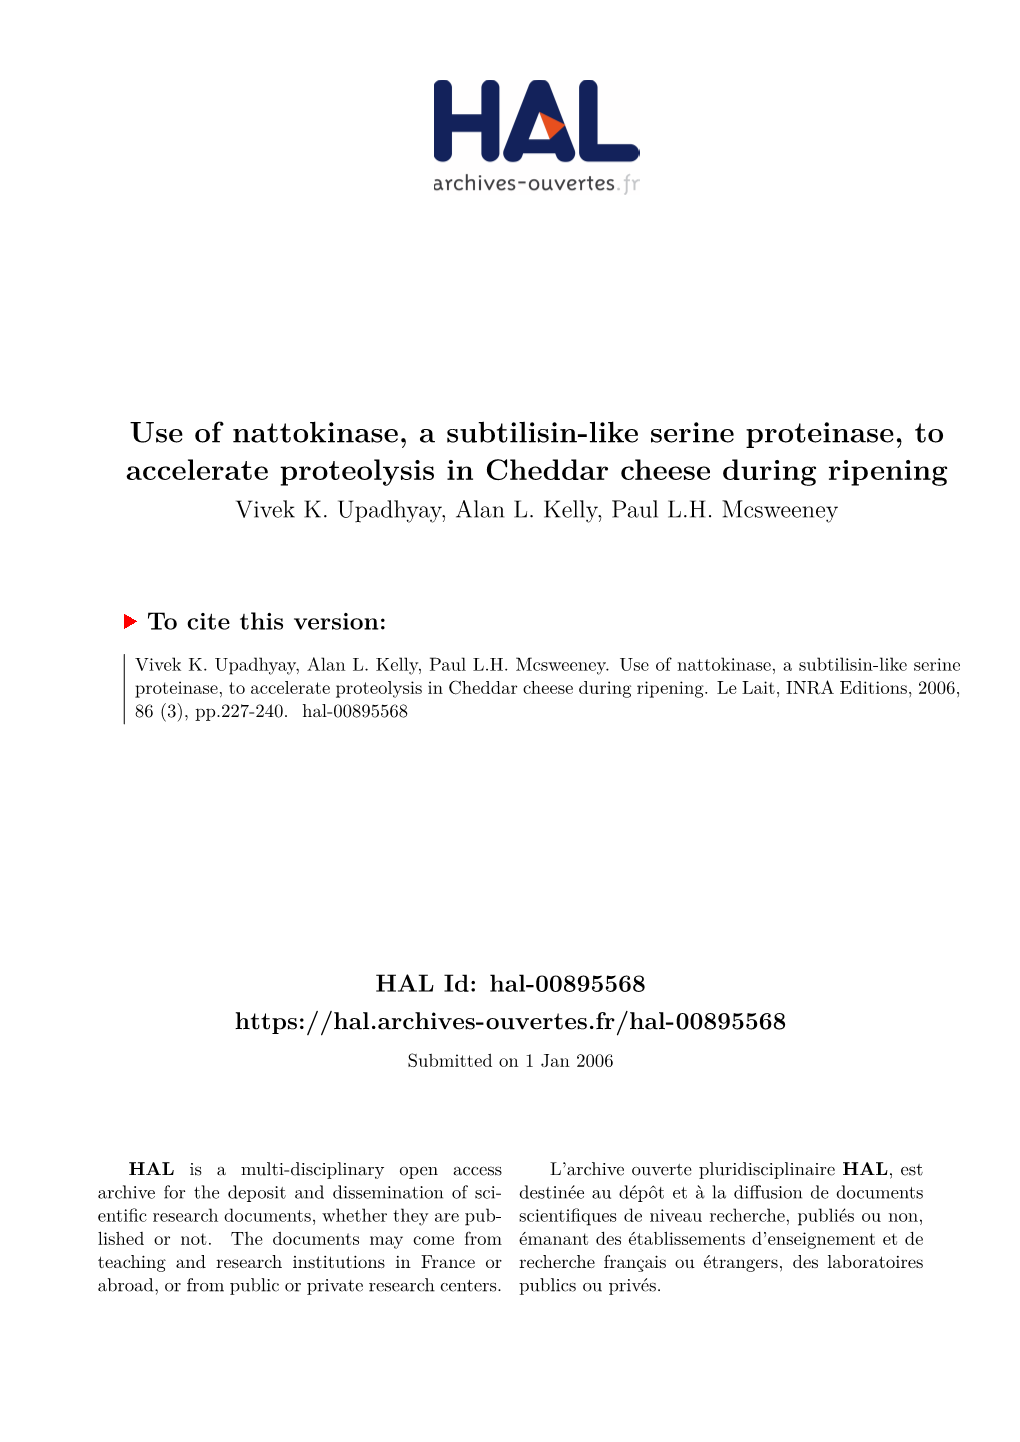 Use of Nattokinase, a Subtilisin-Like Serine Proteinase, to Accelerate Proteolysis in Cheddar Cheese During Ripening Vivek K